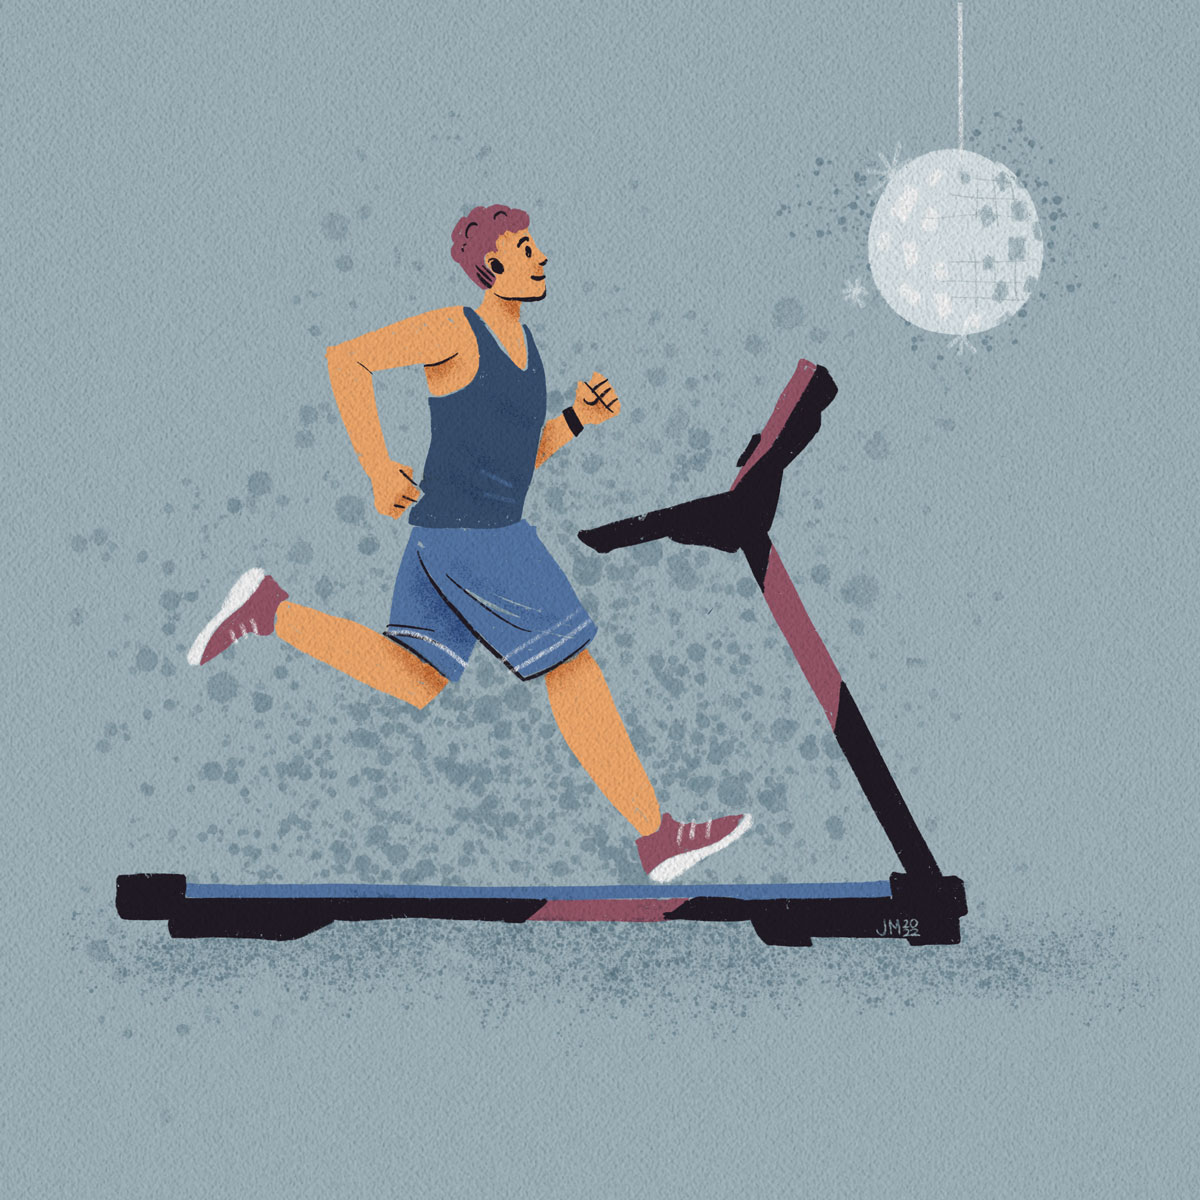 Illustration of man working out as part of New Year's resolution